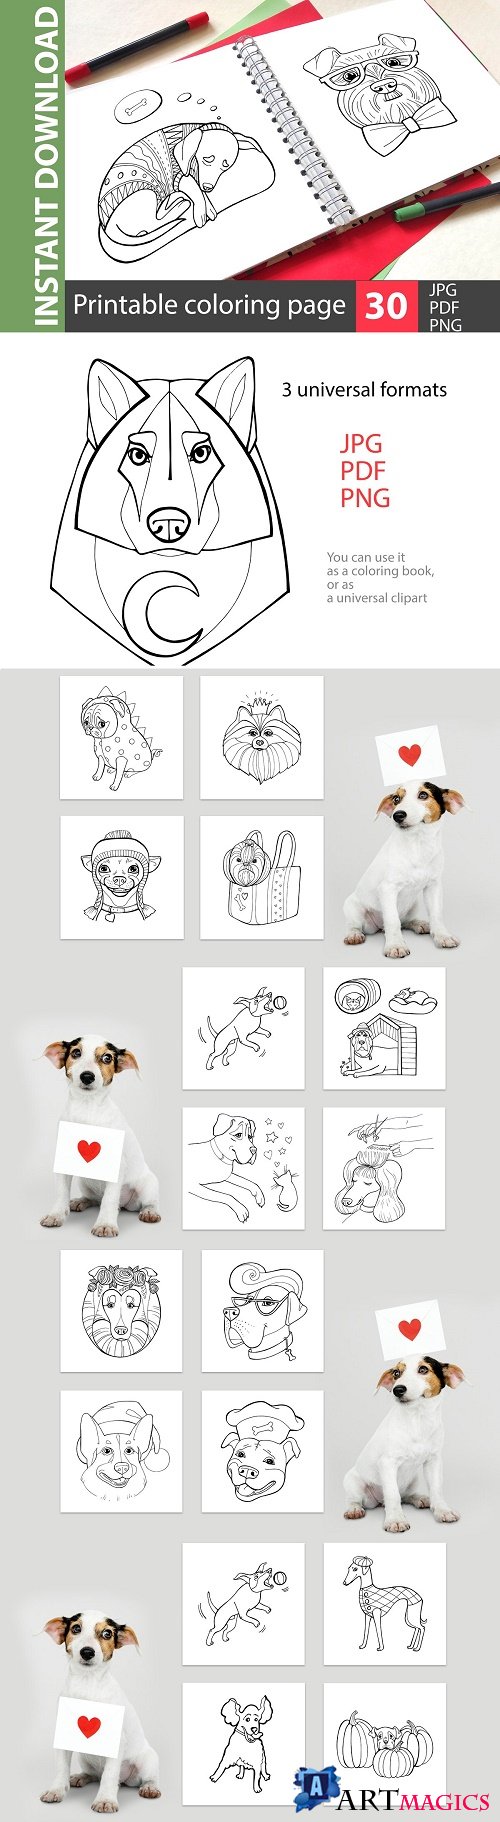 Liked dogs - big coloring book - 4699131